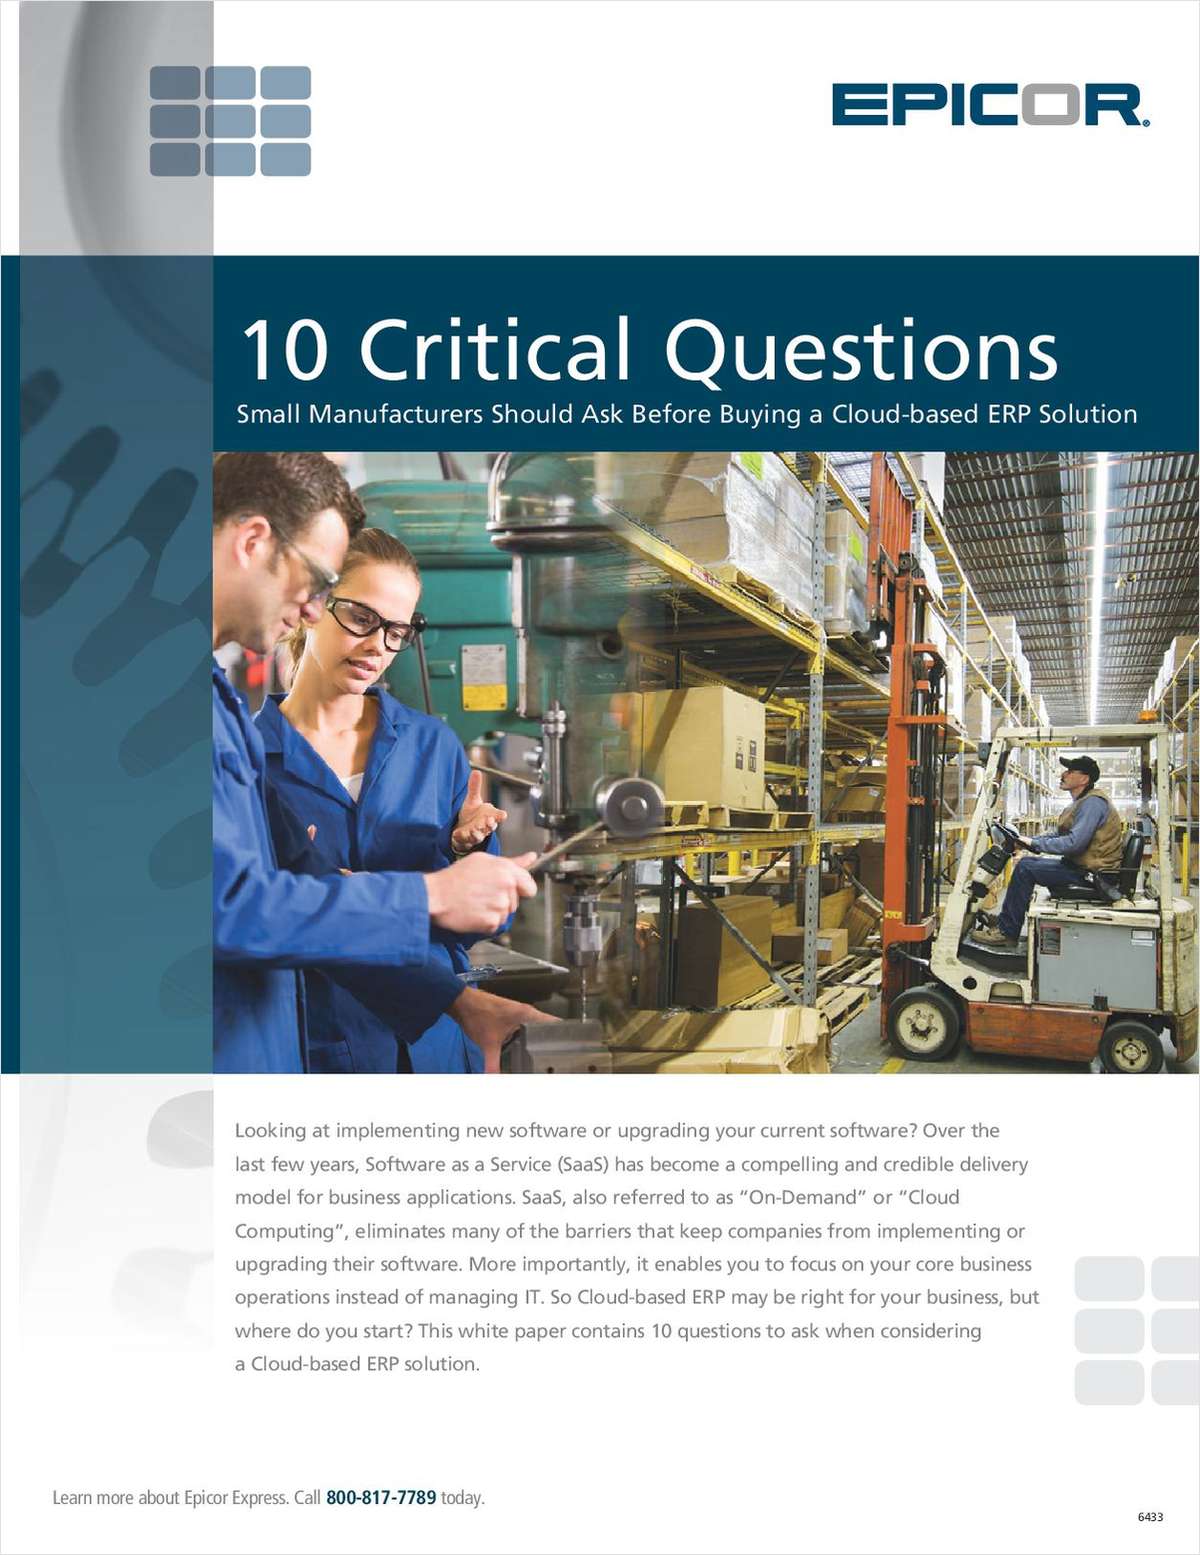 10 Critical Questions Small Manufacturers Should Ask Before Buying a Cloud-based ERP Solution